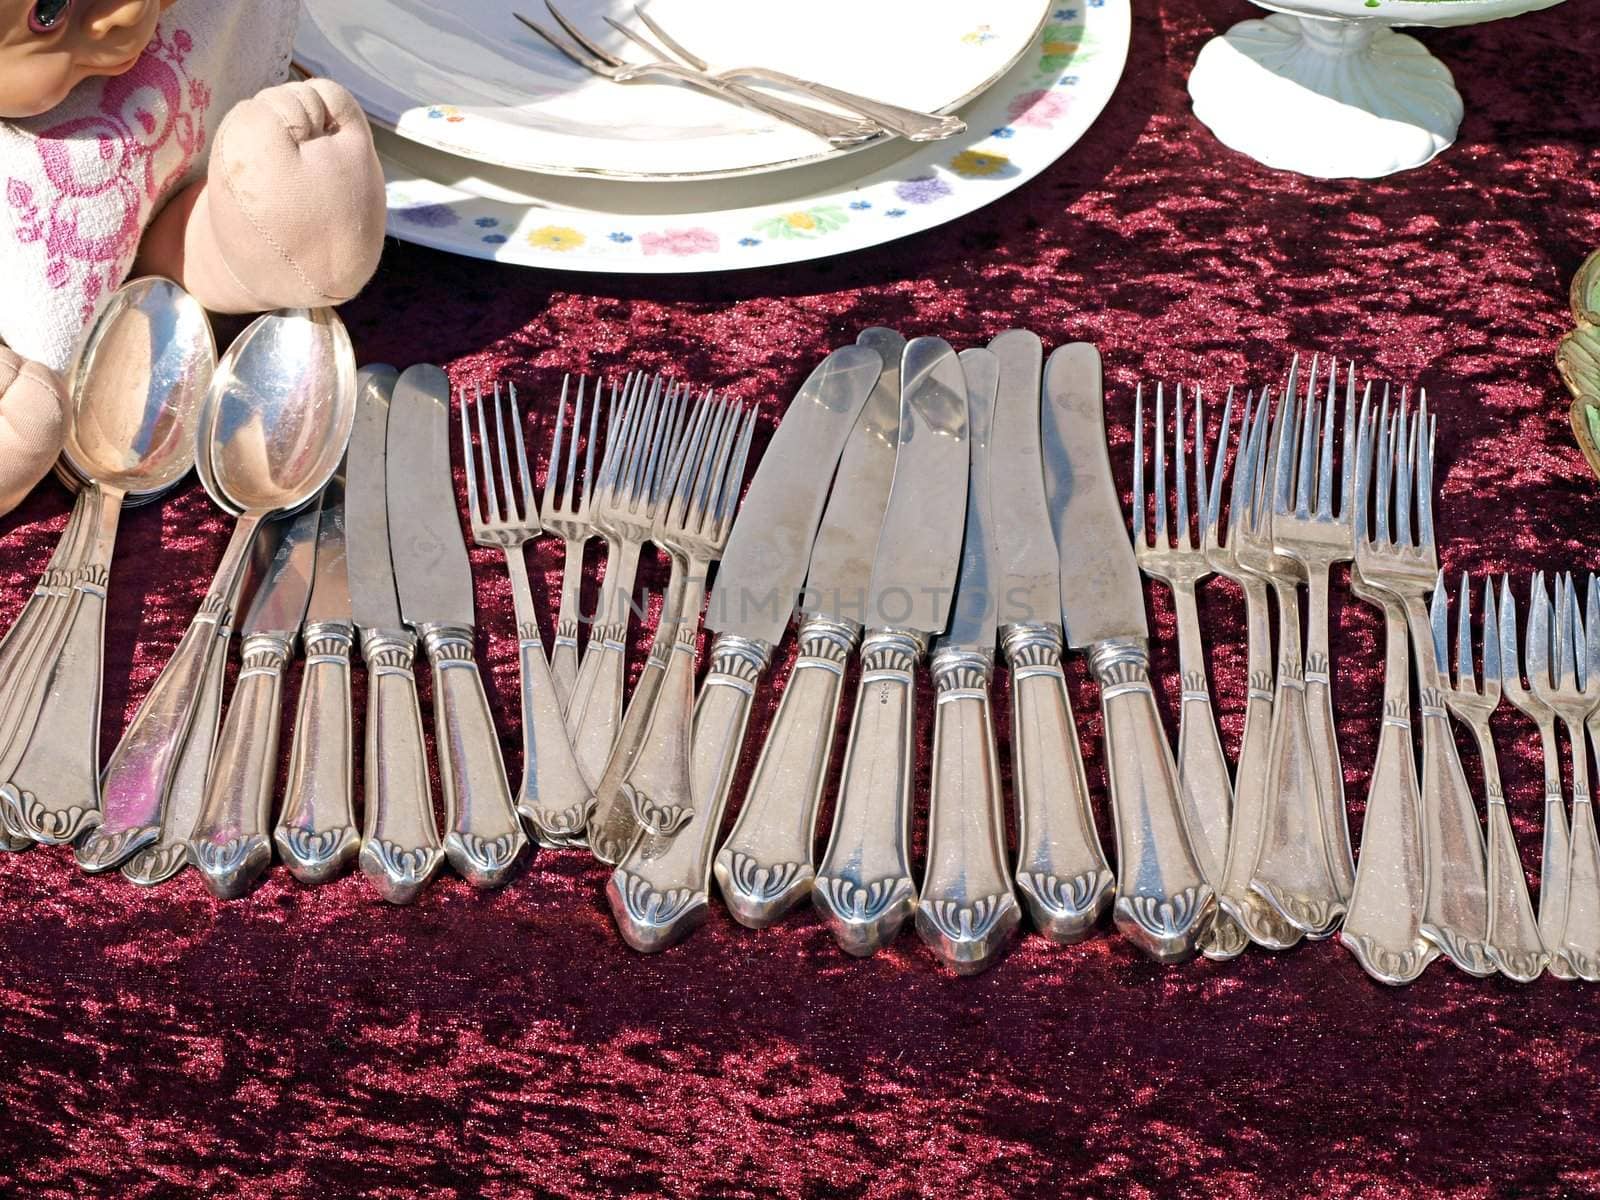 Antique silverware cutlery by Ronyzmbow